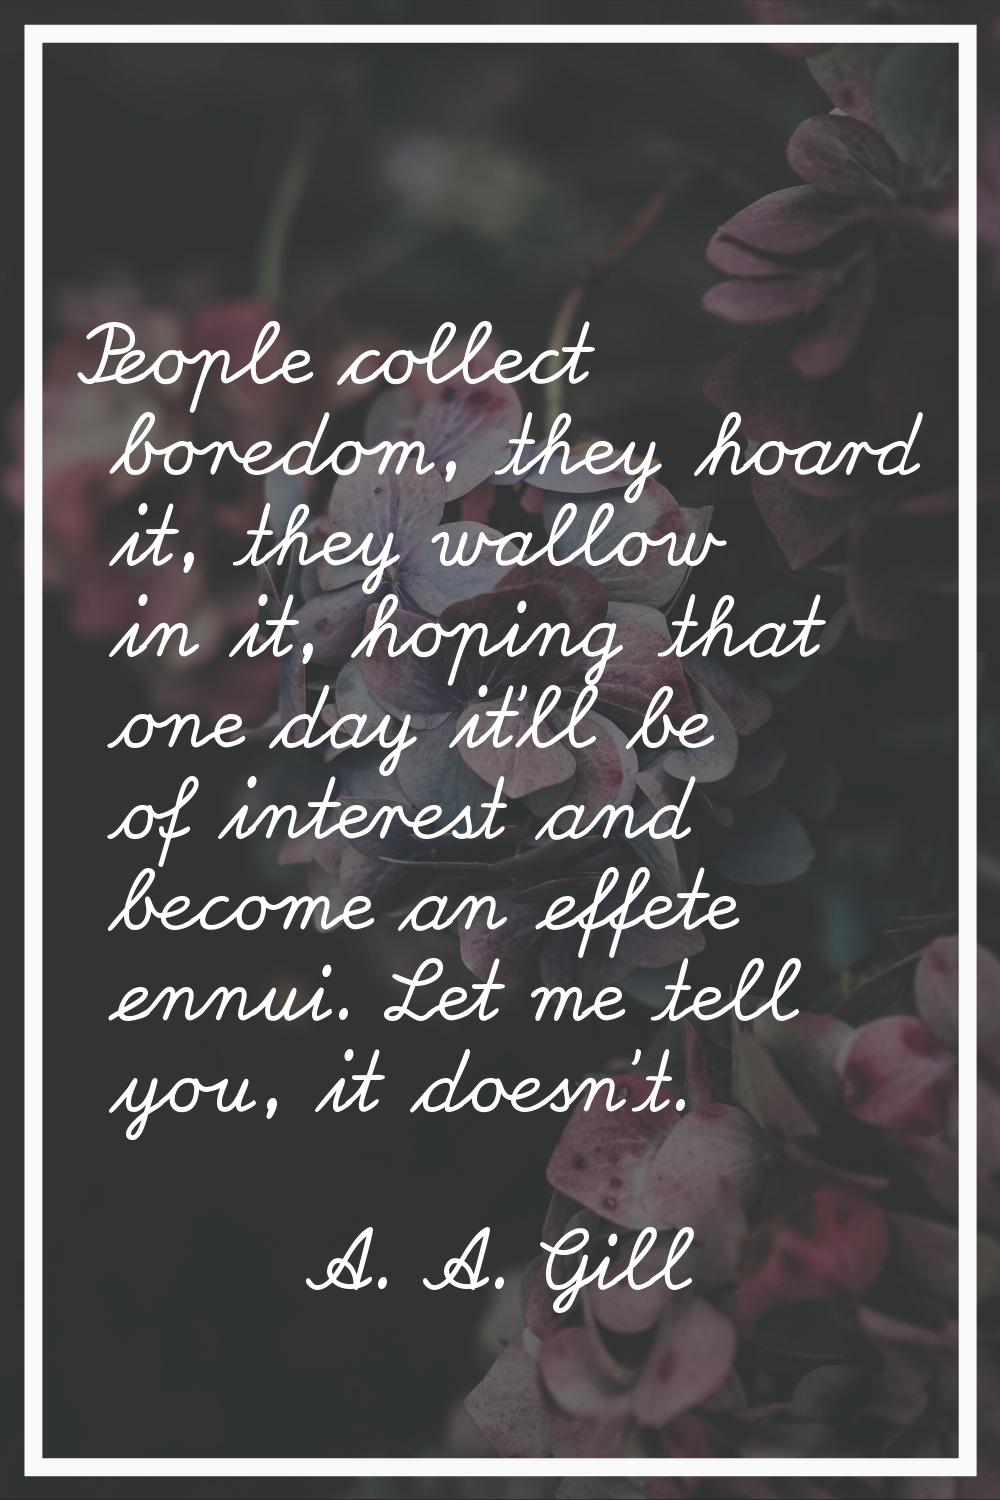 People collect boredom, they hoard it, they wallow in it, hoping that one day it'll be of interest 